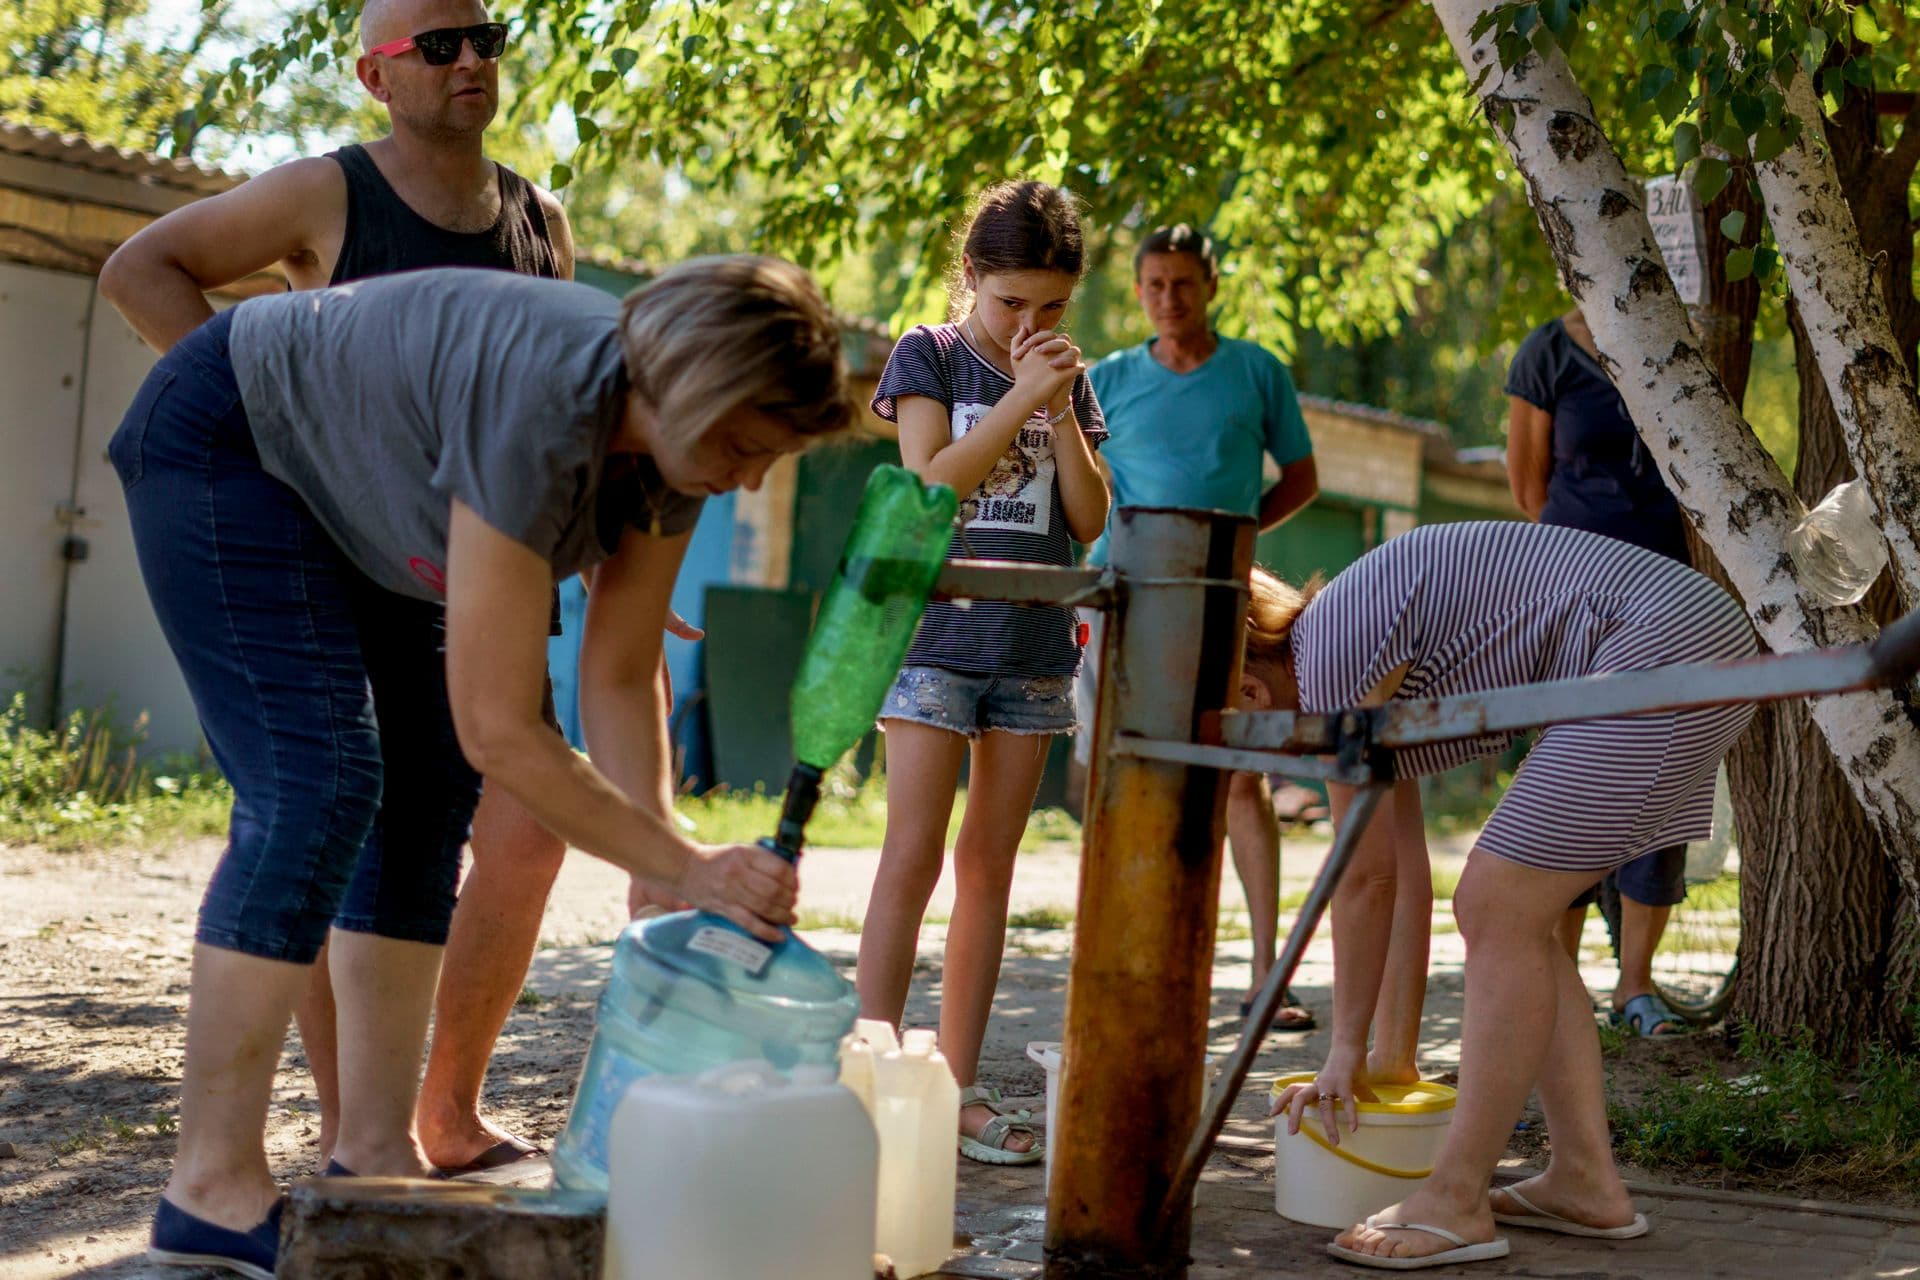 Residents gather to pump water from a well outside an apartment complex in Sloviansk